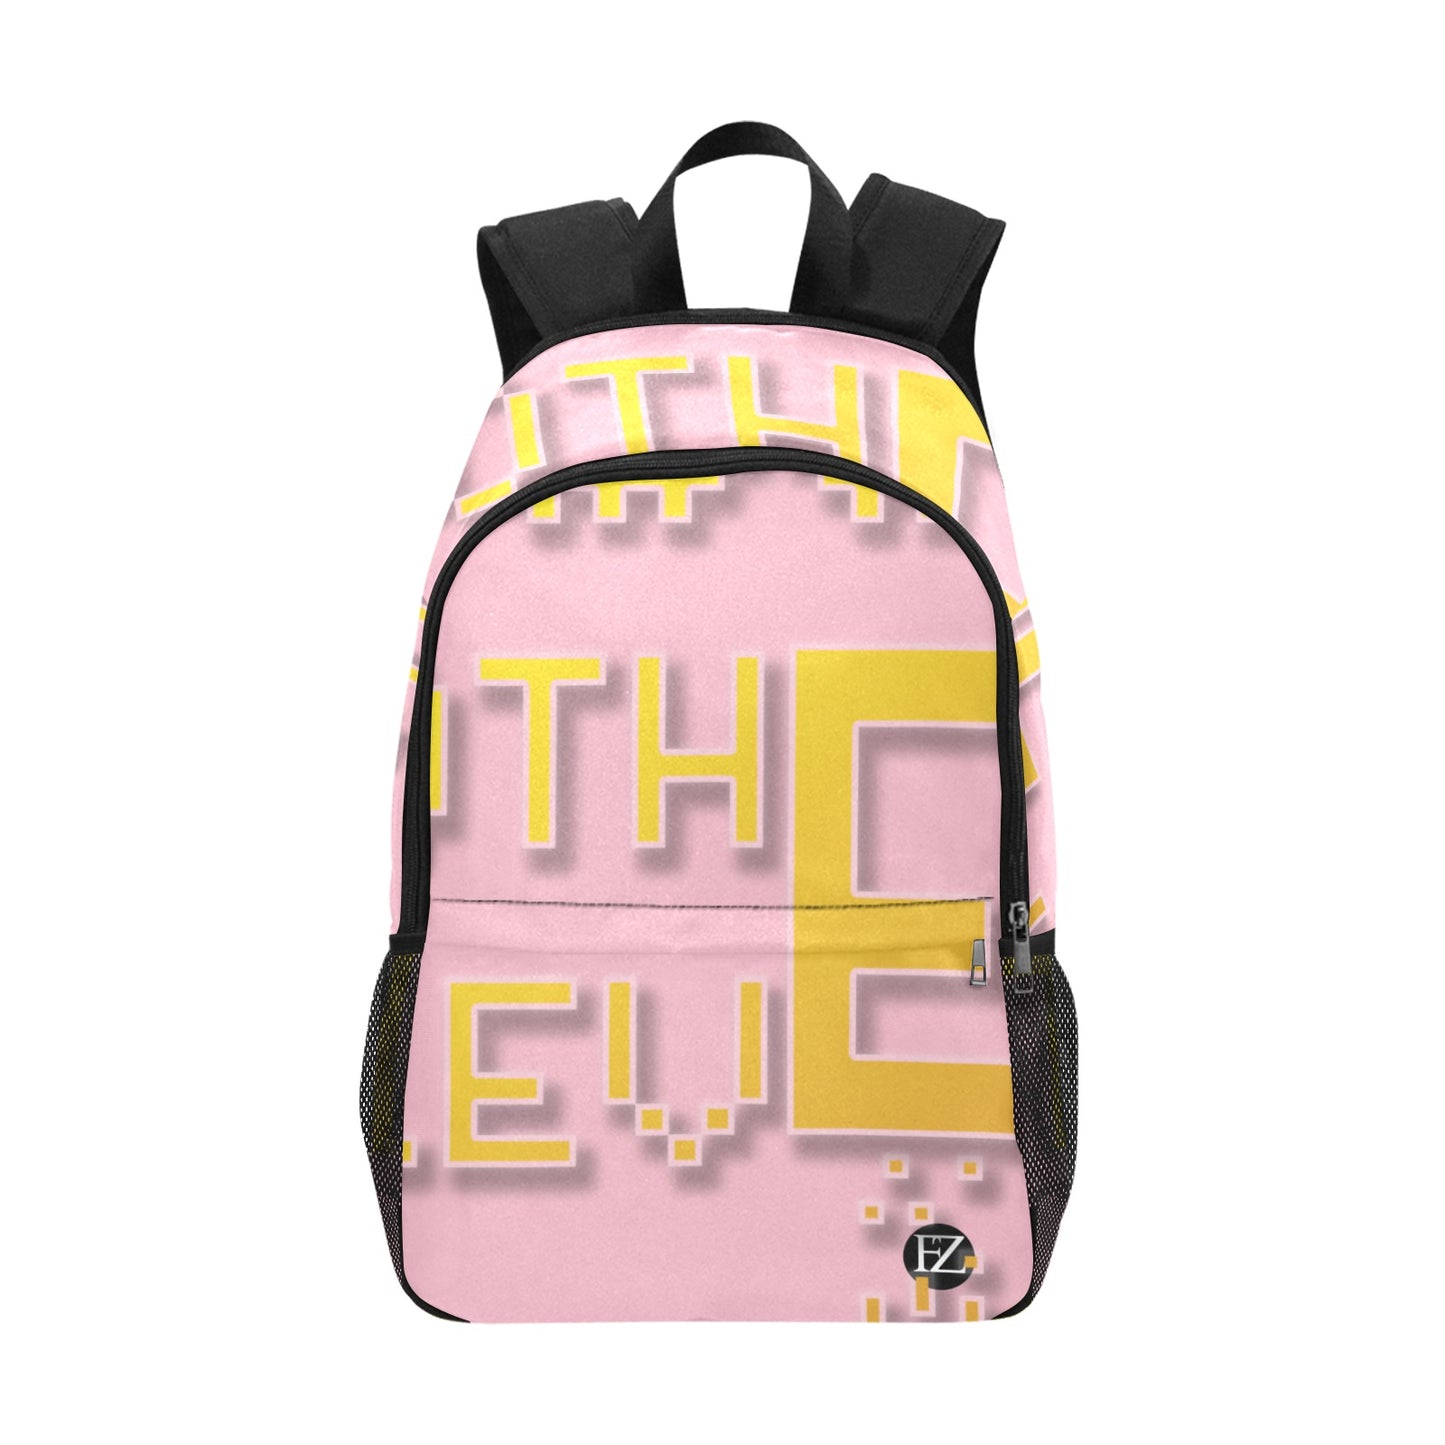 fz yellow levels backpack one size / fz levels backpack - pink all-over print unisex casual backpack with side mesh pockets (model 1659)